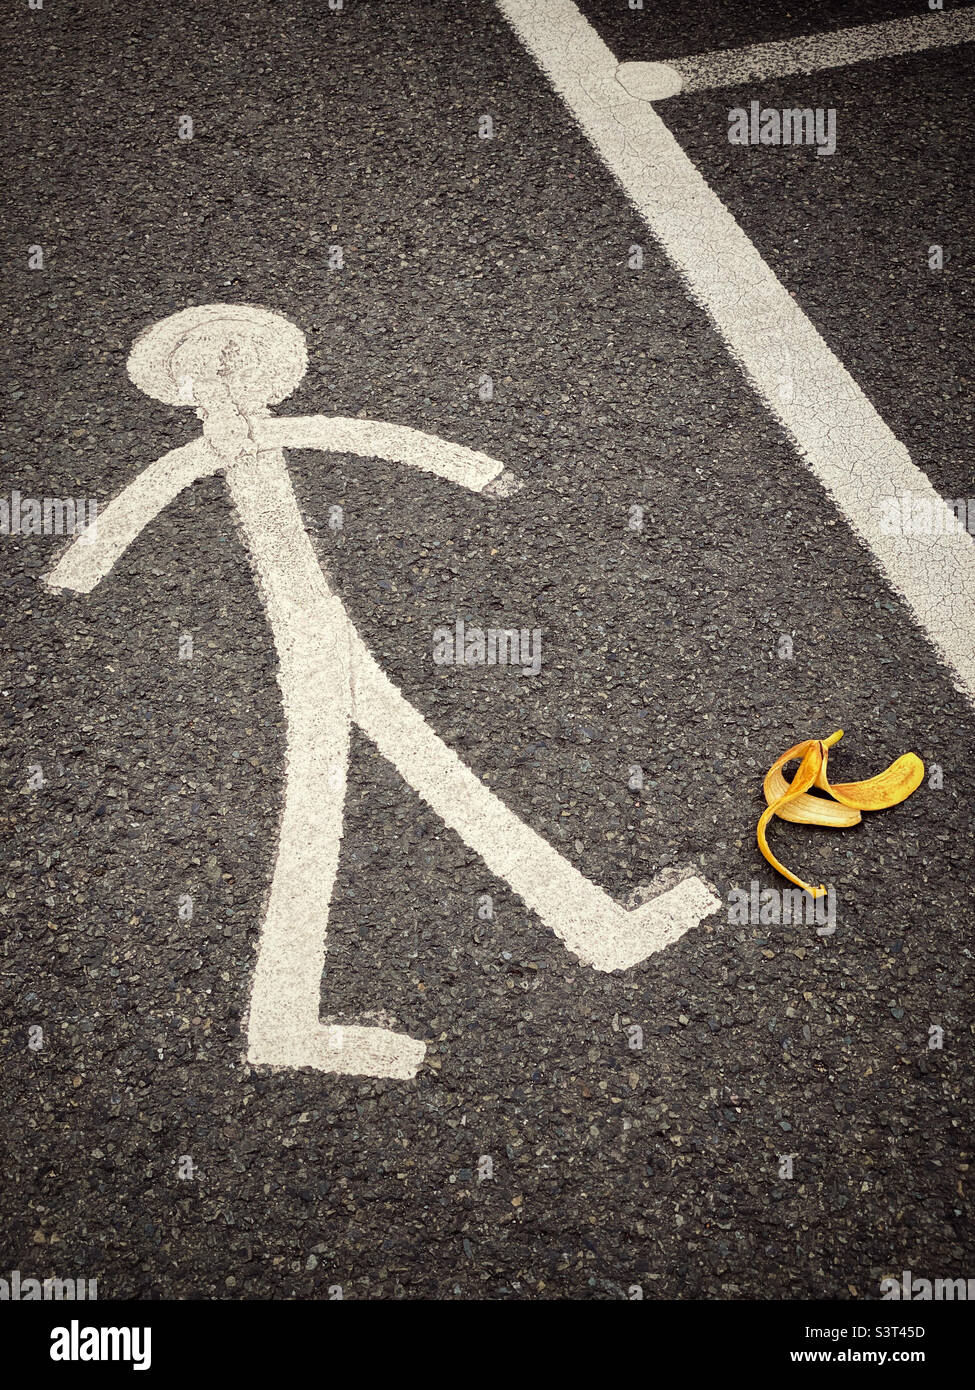 A discarded banana skin peel could be dangerous if you slipped on it. Beware! Keep your eyes peeled for hazards. Photo ©️ COLIN HOSKINS. Stock Photo